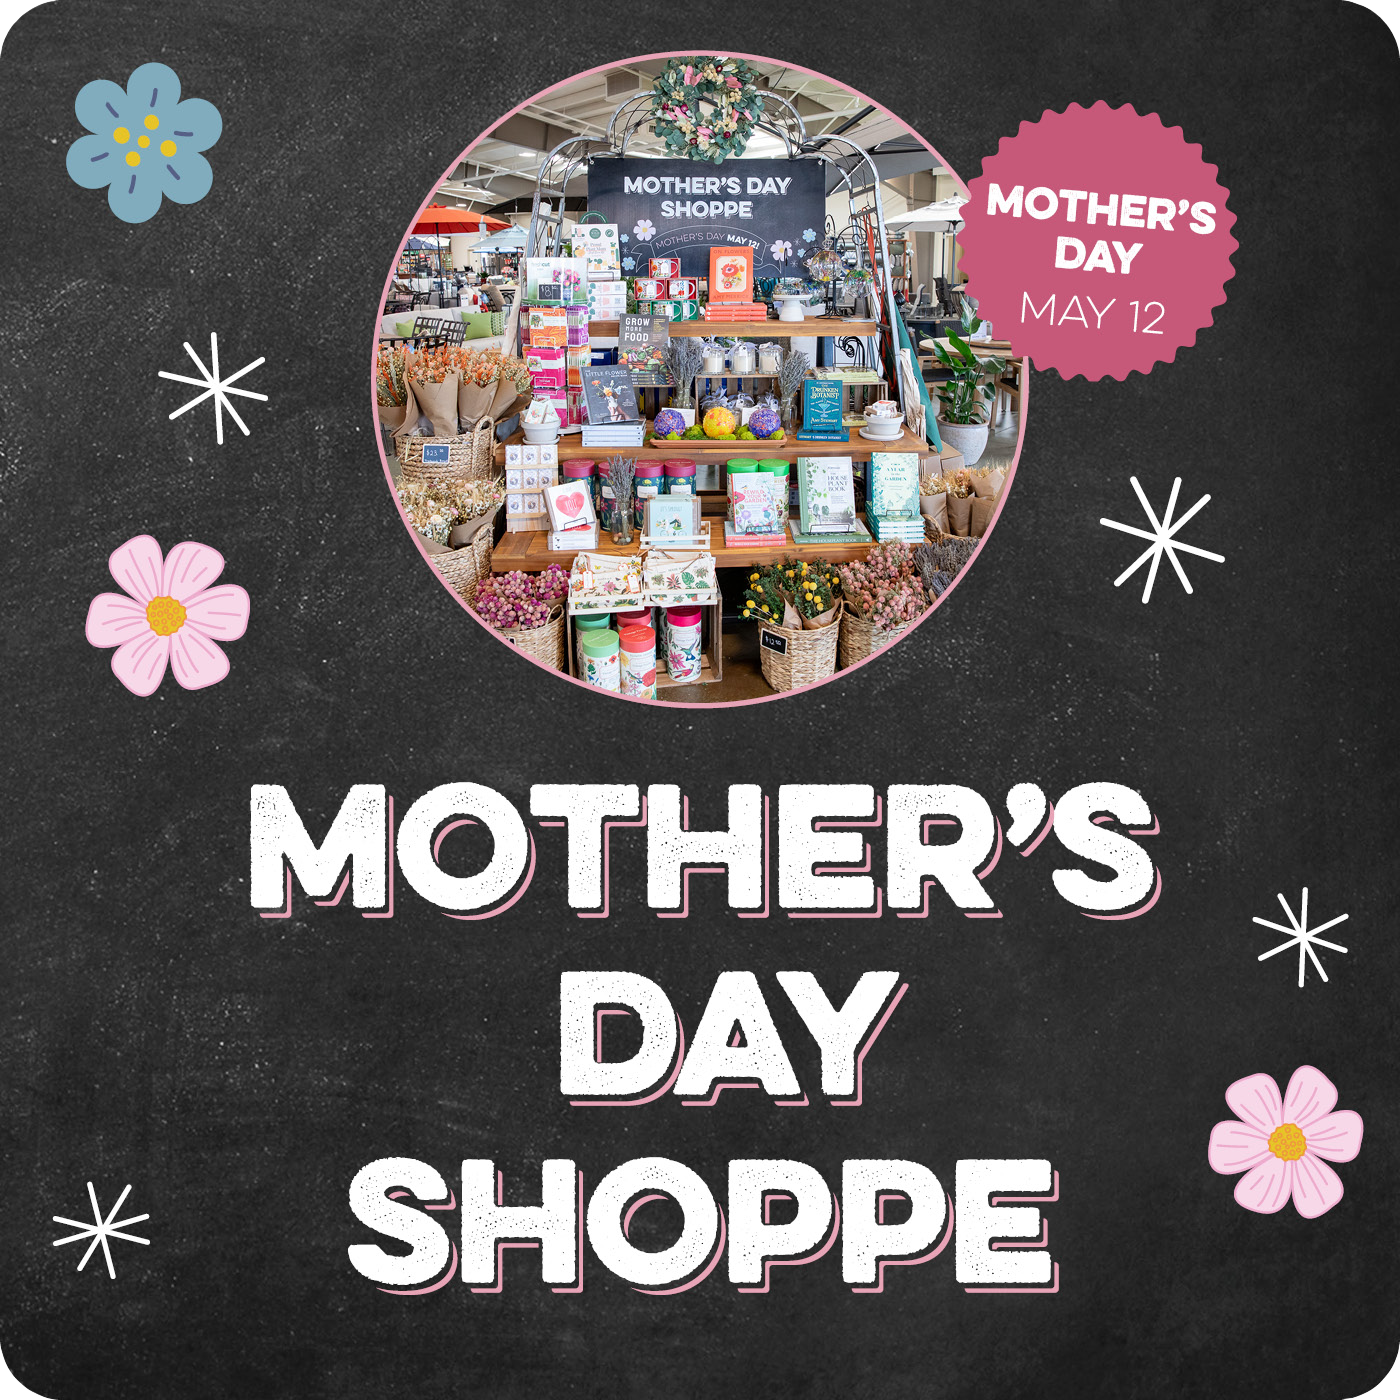 Mother’s Day Shoppe